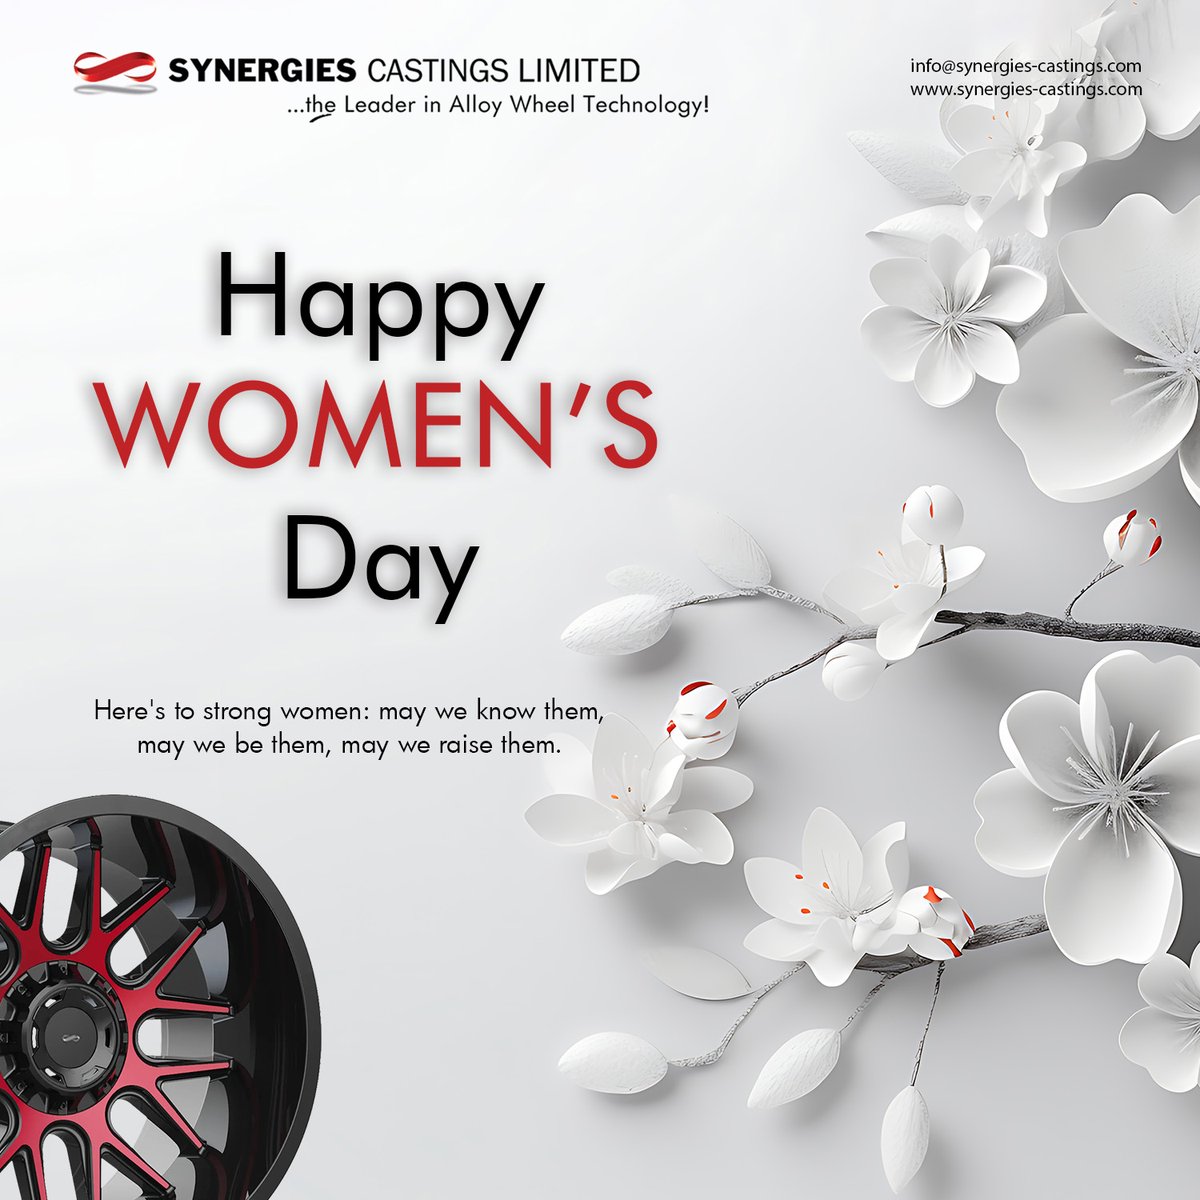 Today, we honor the courage, grace, and achievements of women everywhere. Happy Women's Day.

#alloywheelmanufacturersinindia #precisionalloycarwheelmanufacturer #worldclassalloywheels #chromewheels #specialalloywheelsforevs #synergies #synergiescastings #wheelsmanufacturing